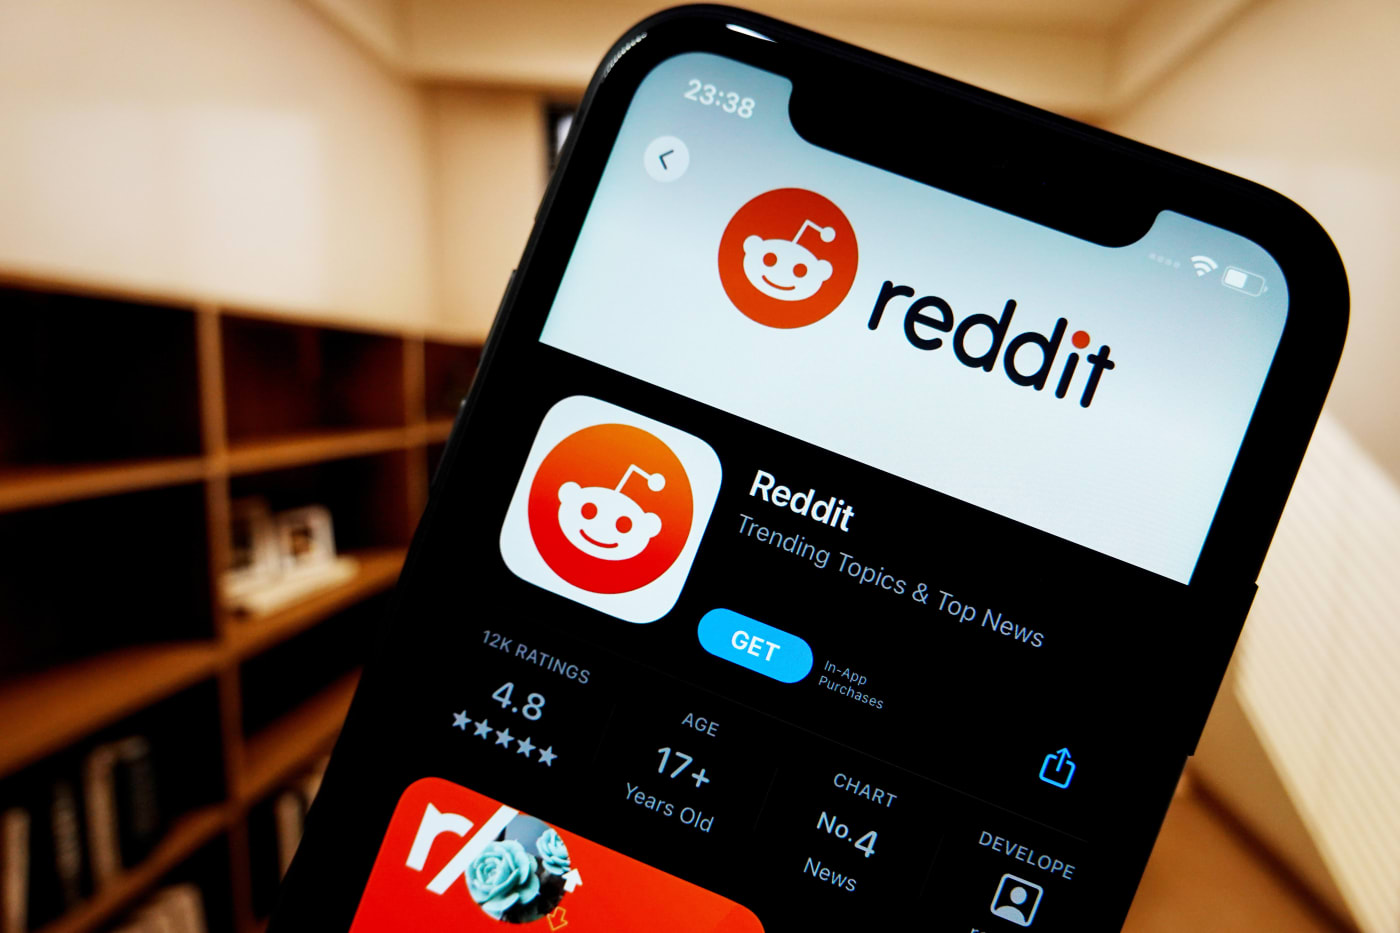 Reddit is licensing its content to Google to help train its AI models